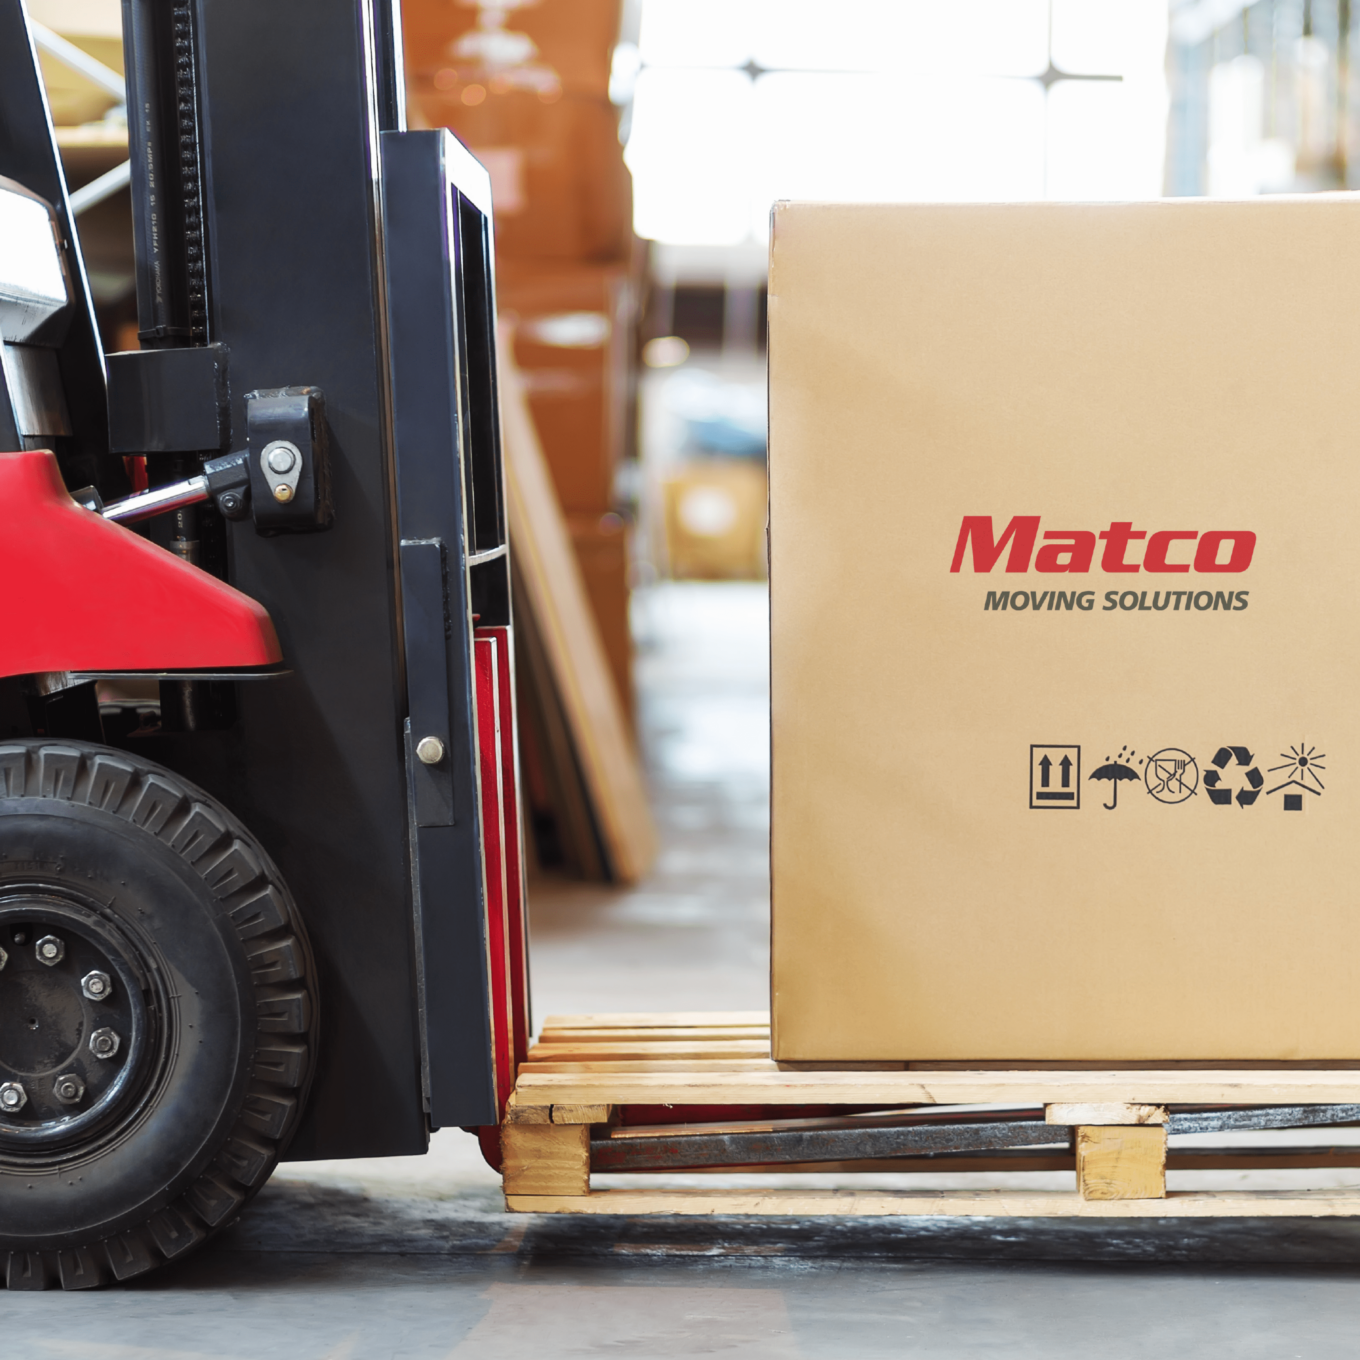 Matco Long Term and Temporary Storage